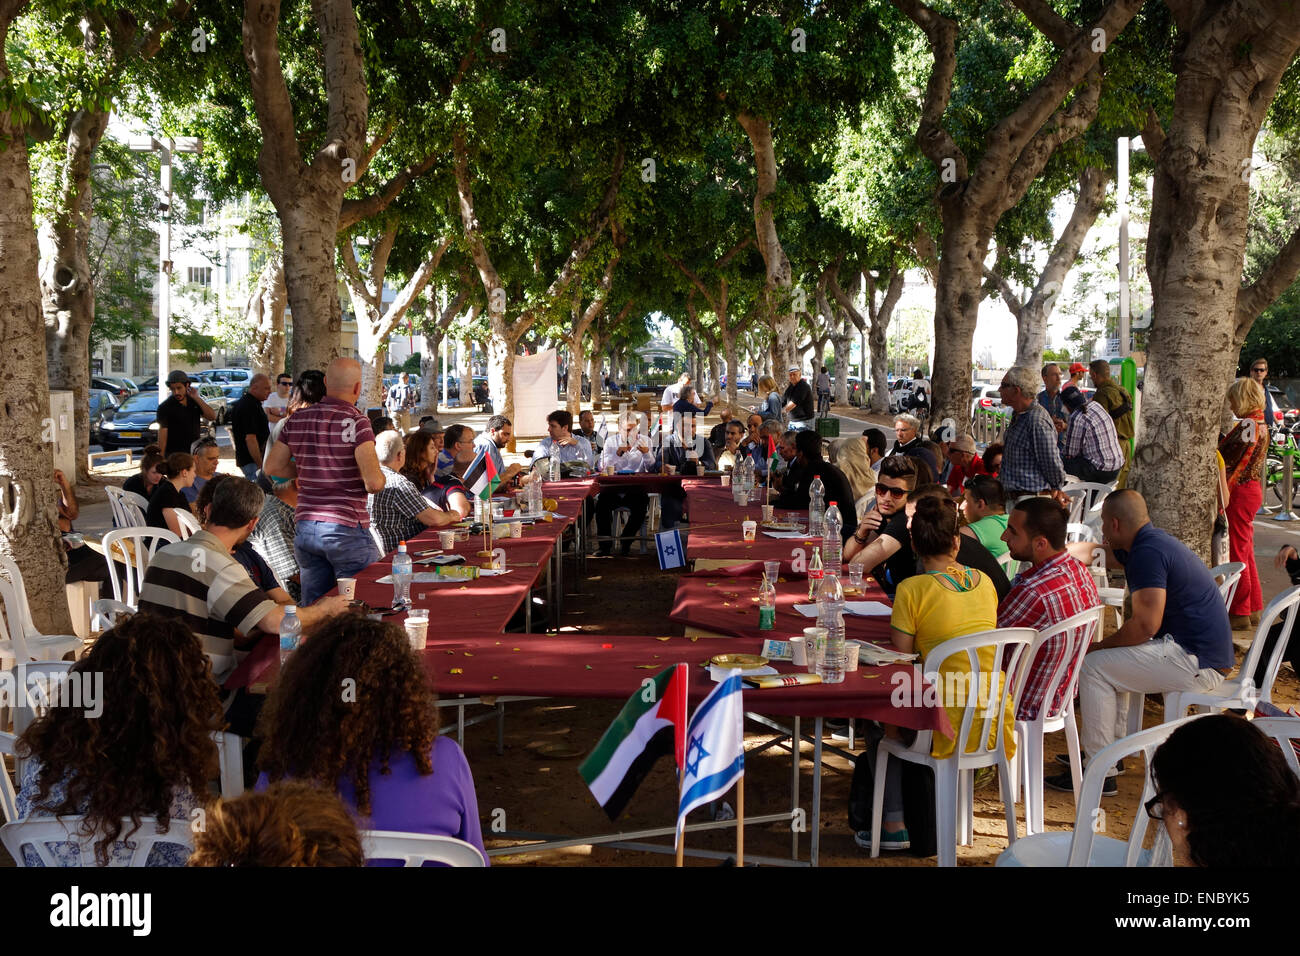 Israeli and Palestinian civilians gather in Rothschild street for an open public dialogue on peace and reconciliation, Tel Aviv Israel Stock Photo